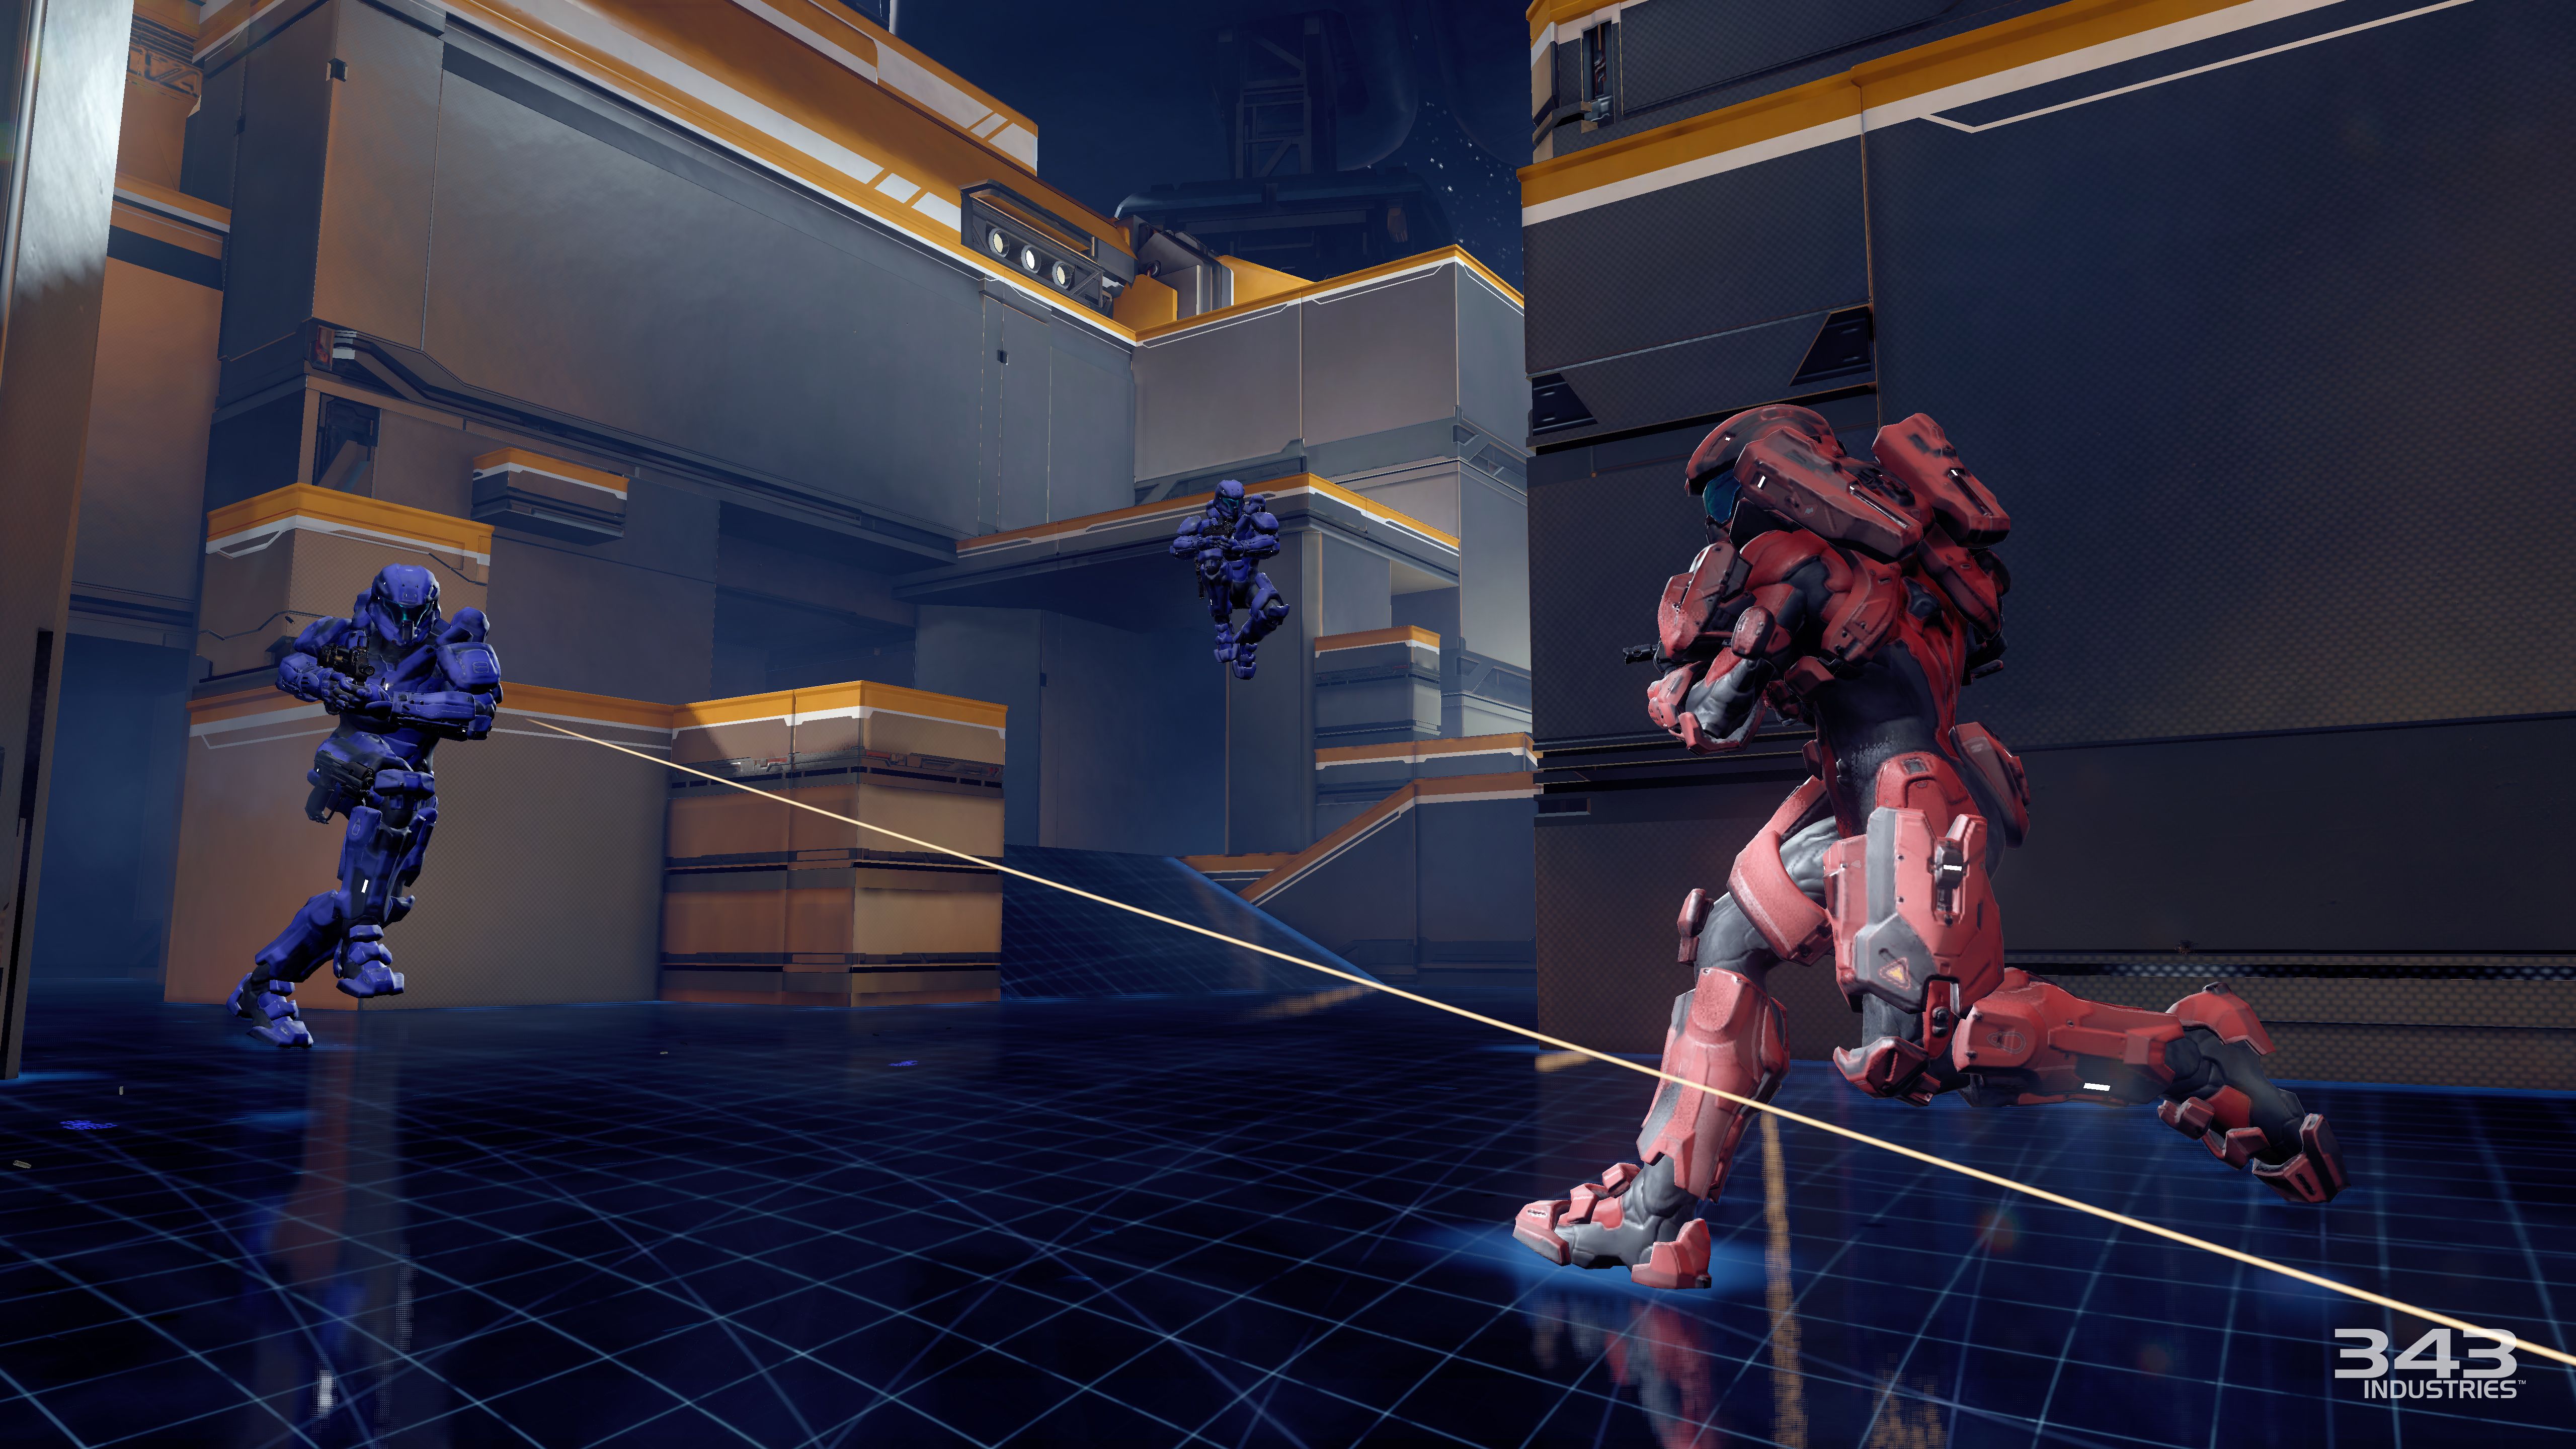 Halo 5 review: Multiplayer restrictions aside, this is another